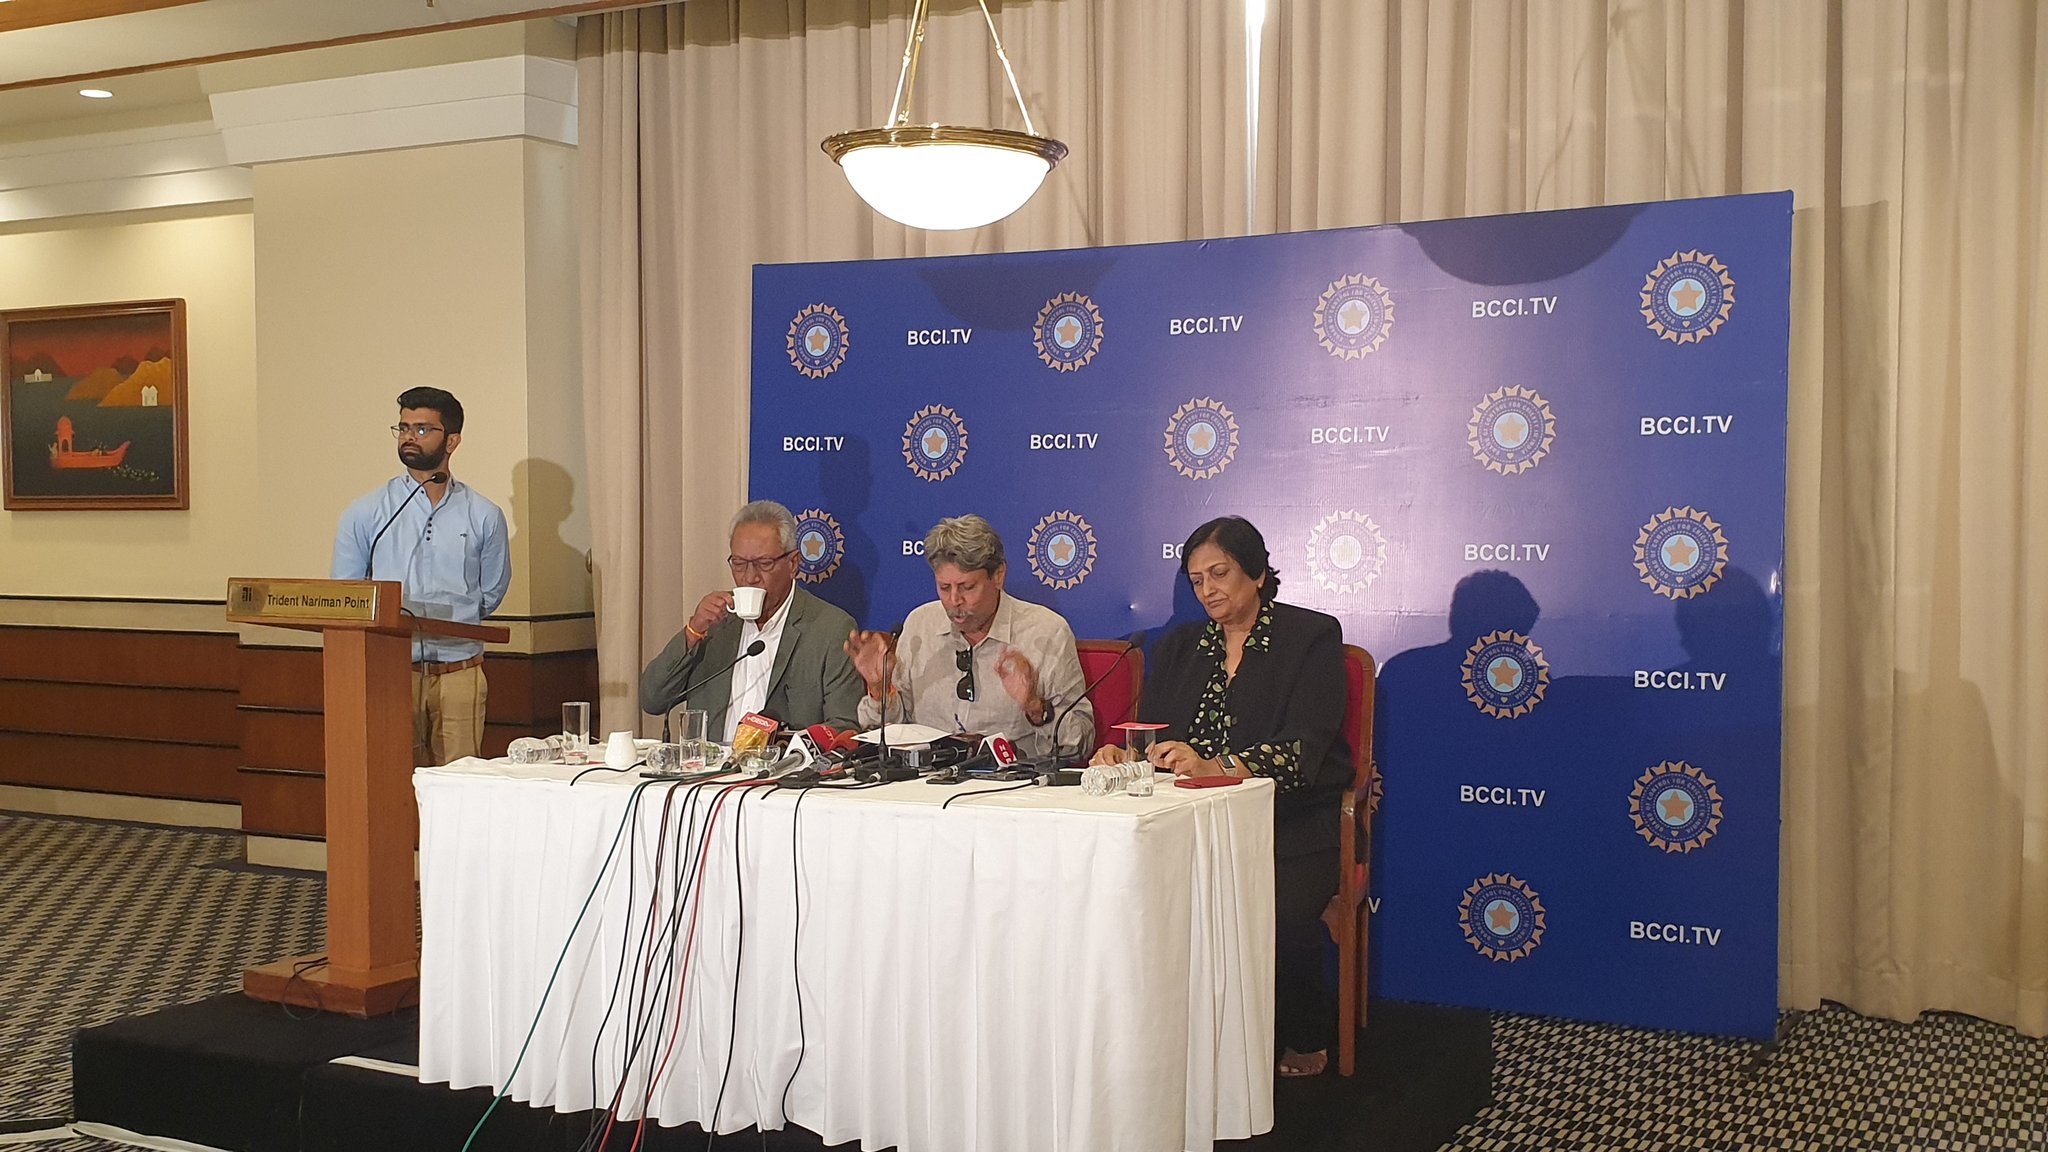 conflict of interest, cricketers, BCCI, informal meeting, Rahul Dravid, Sourav Ganguly, Cricket Advisory Committee, CoA, english news website, The Federal